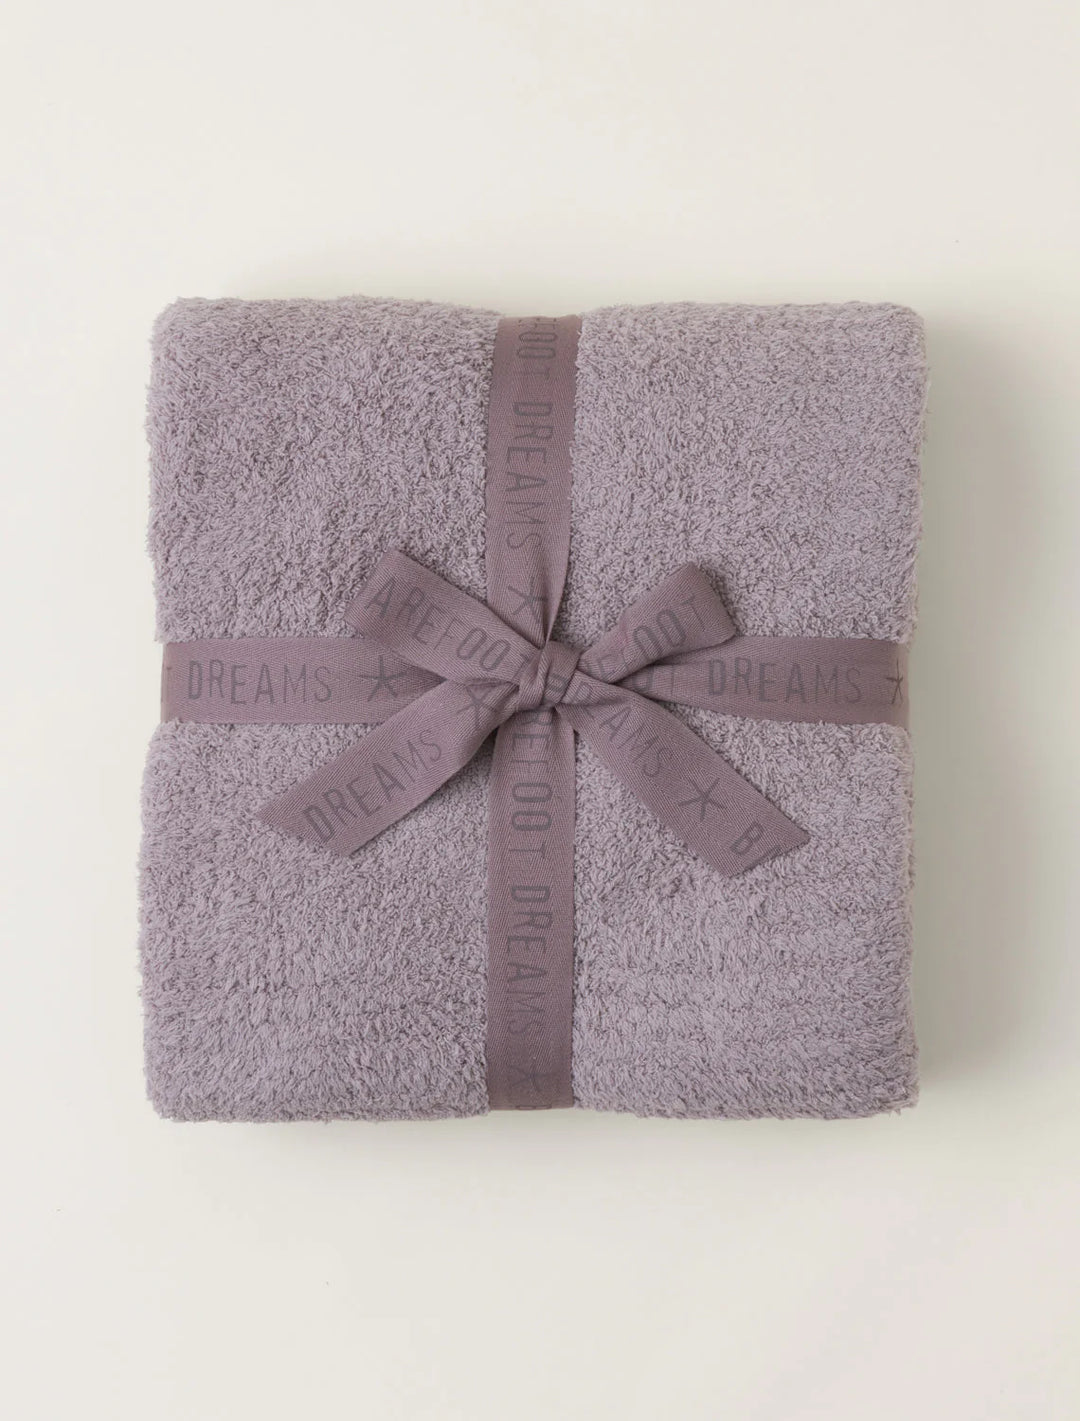 Barefoot Dreams CozyChic® Throw in Deep Taupe